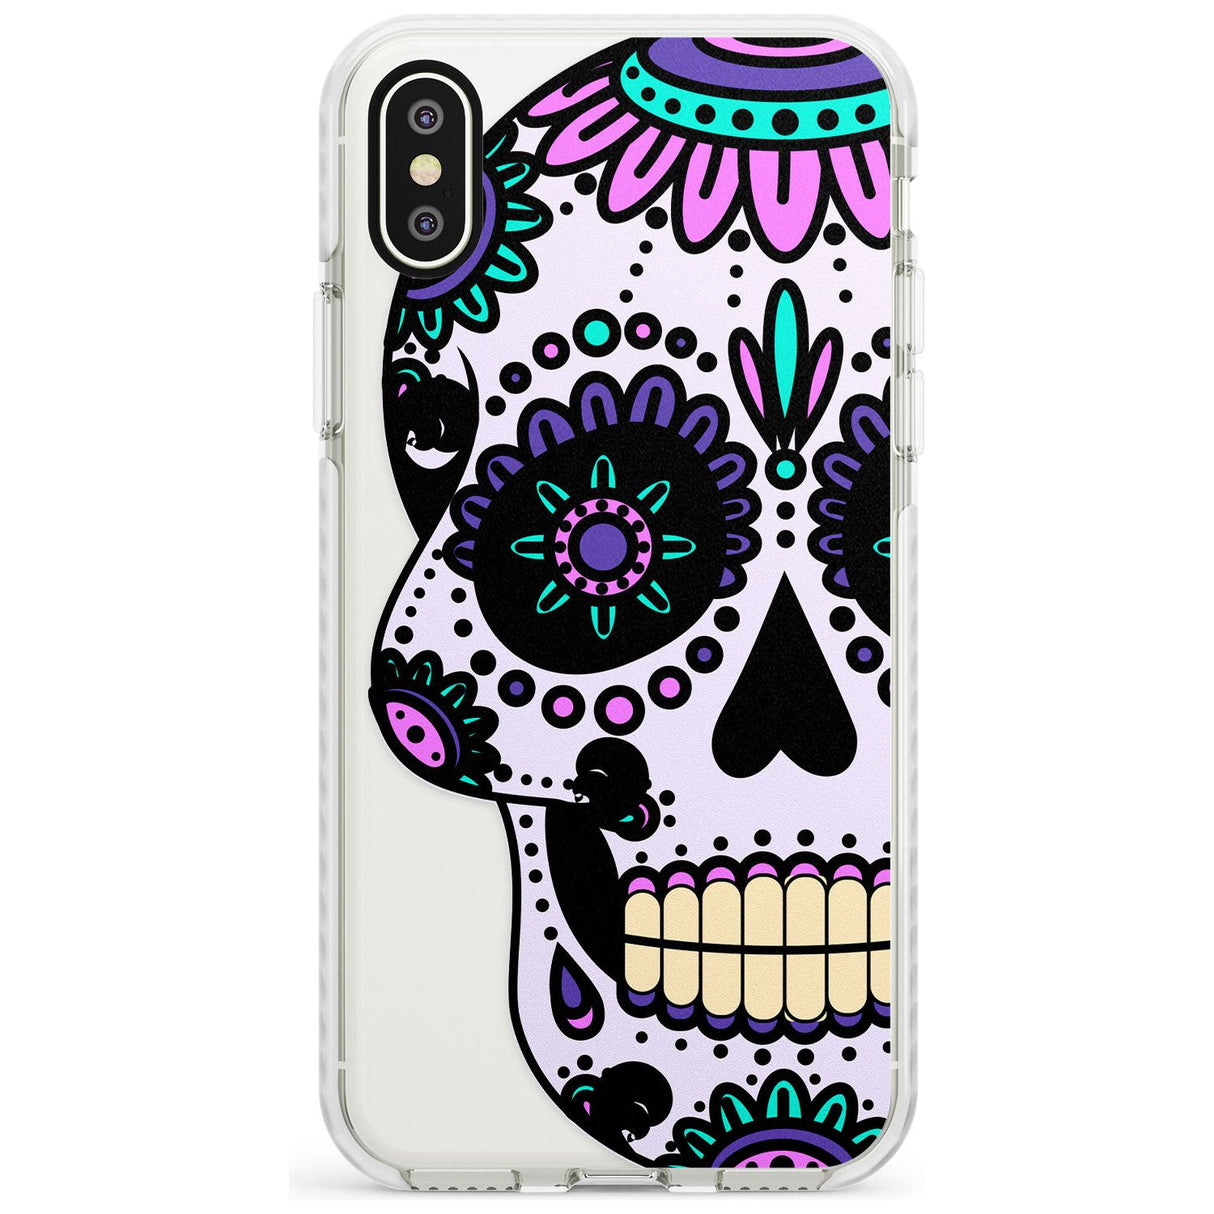 Violet Sugar Skull Impact Phone Case for iPhone X XS Max XR